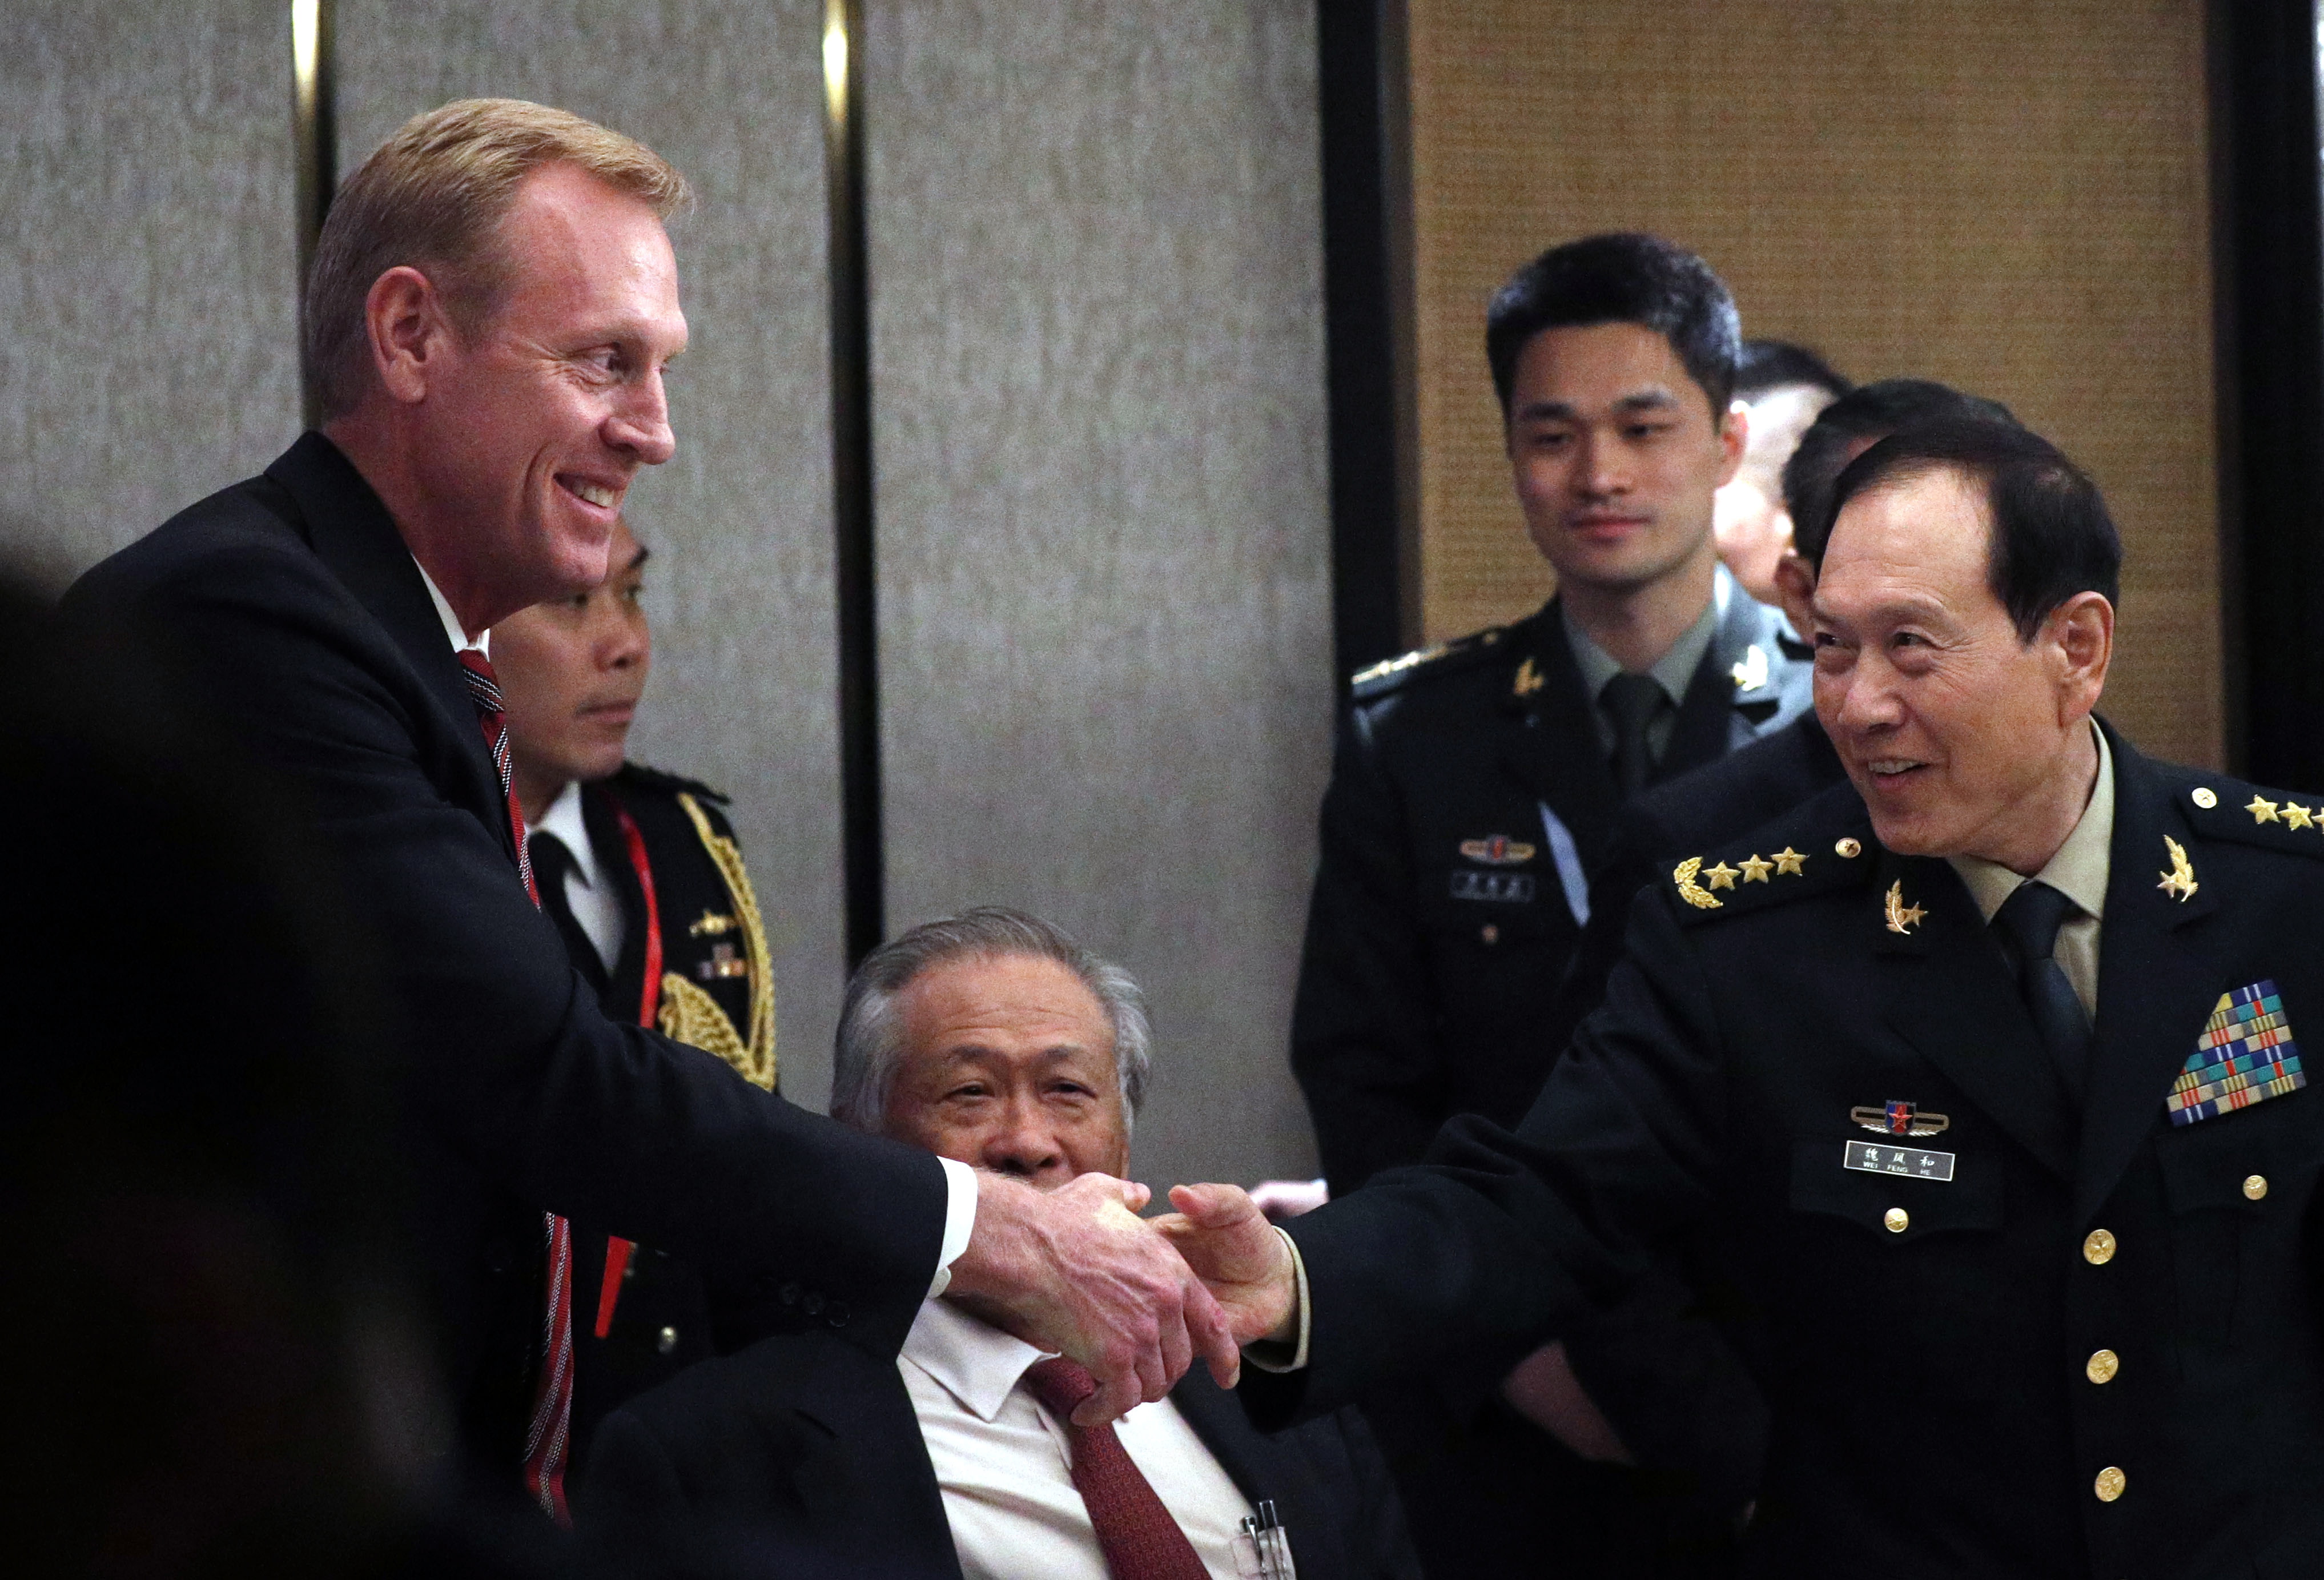 epa07616897 Acting US Secretary of Defense Patrick Shanahan (L) and Chinese Minister of Defense General Wei Fenghe (R) shakes hands during a ministerial roundtable on the sidelines of the International Institute for Strategic Studies (IISS) 18th Asia Security Summit in Singapore, 01 June 2019. The IISS Asia Security Summit is an annual gathering of defense officials in the Asia-Pacific region and is dubbed the Shangri-La Dialogue in honor of the hotel where the event is held. The summit will be held from 31 May to 02 June 2019.  EPA/WALLACE WOON